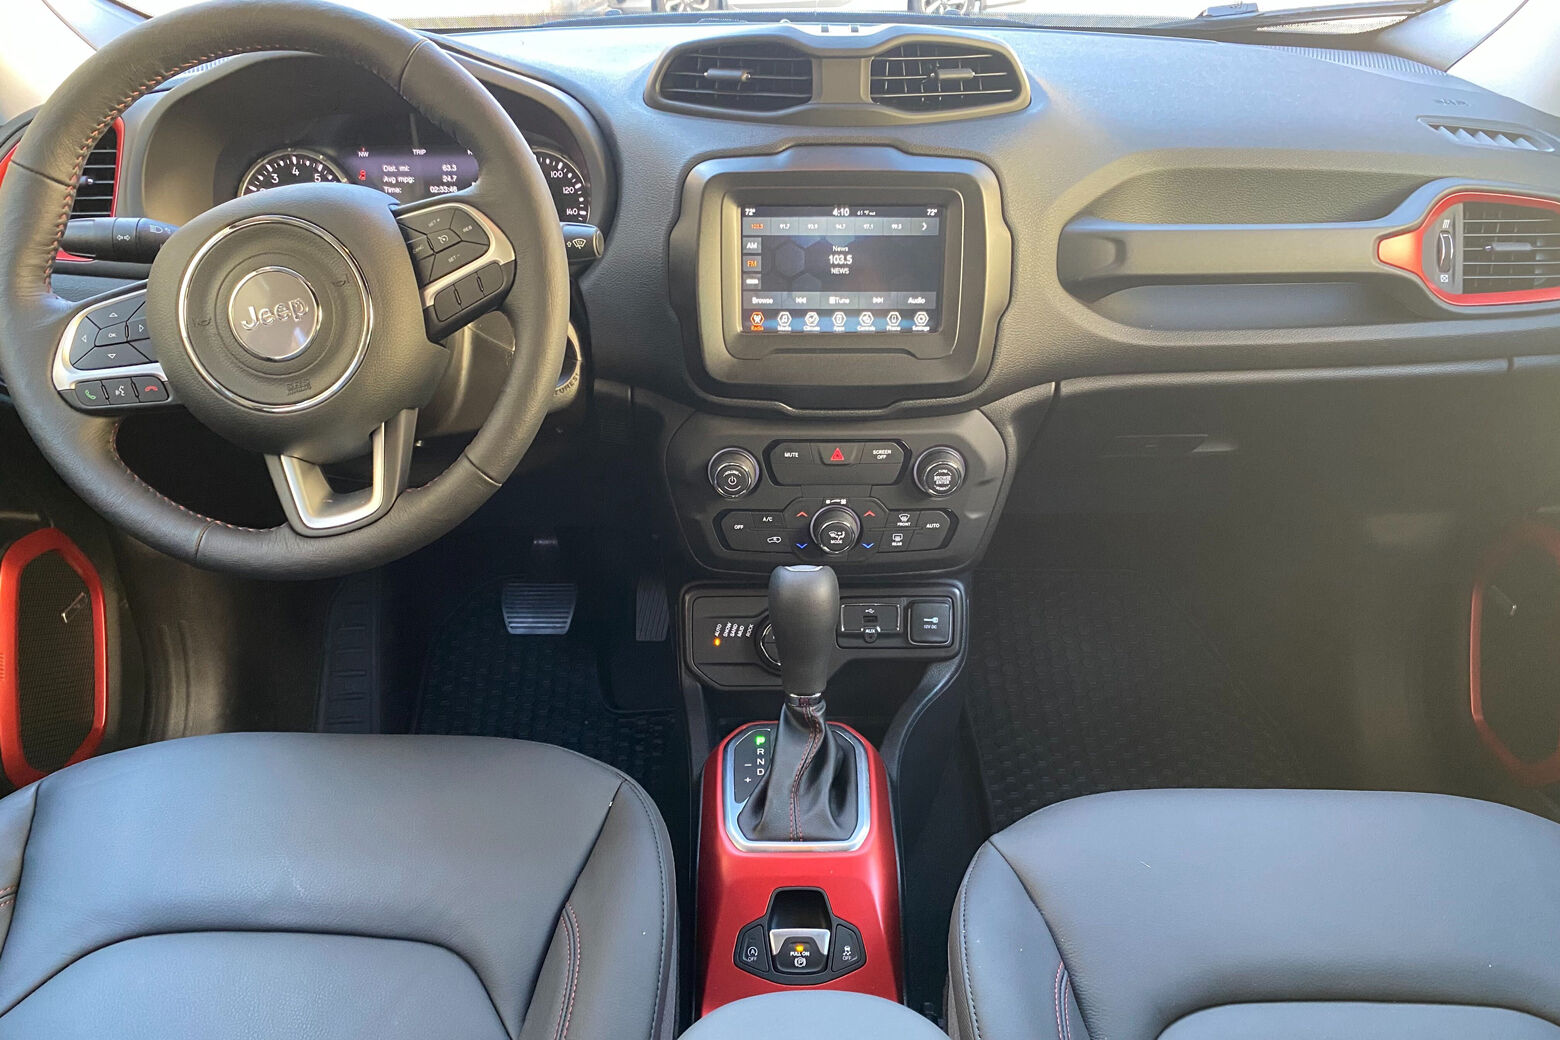 Interior of the Jeep Renegade